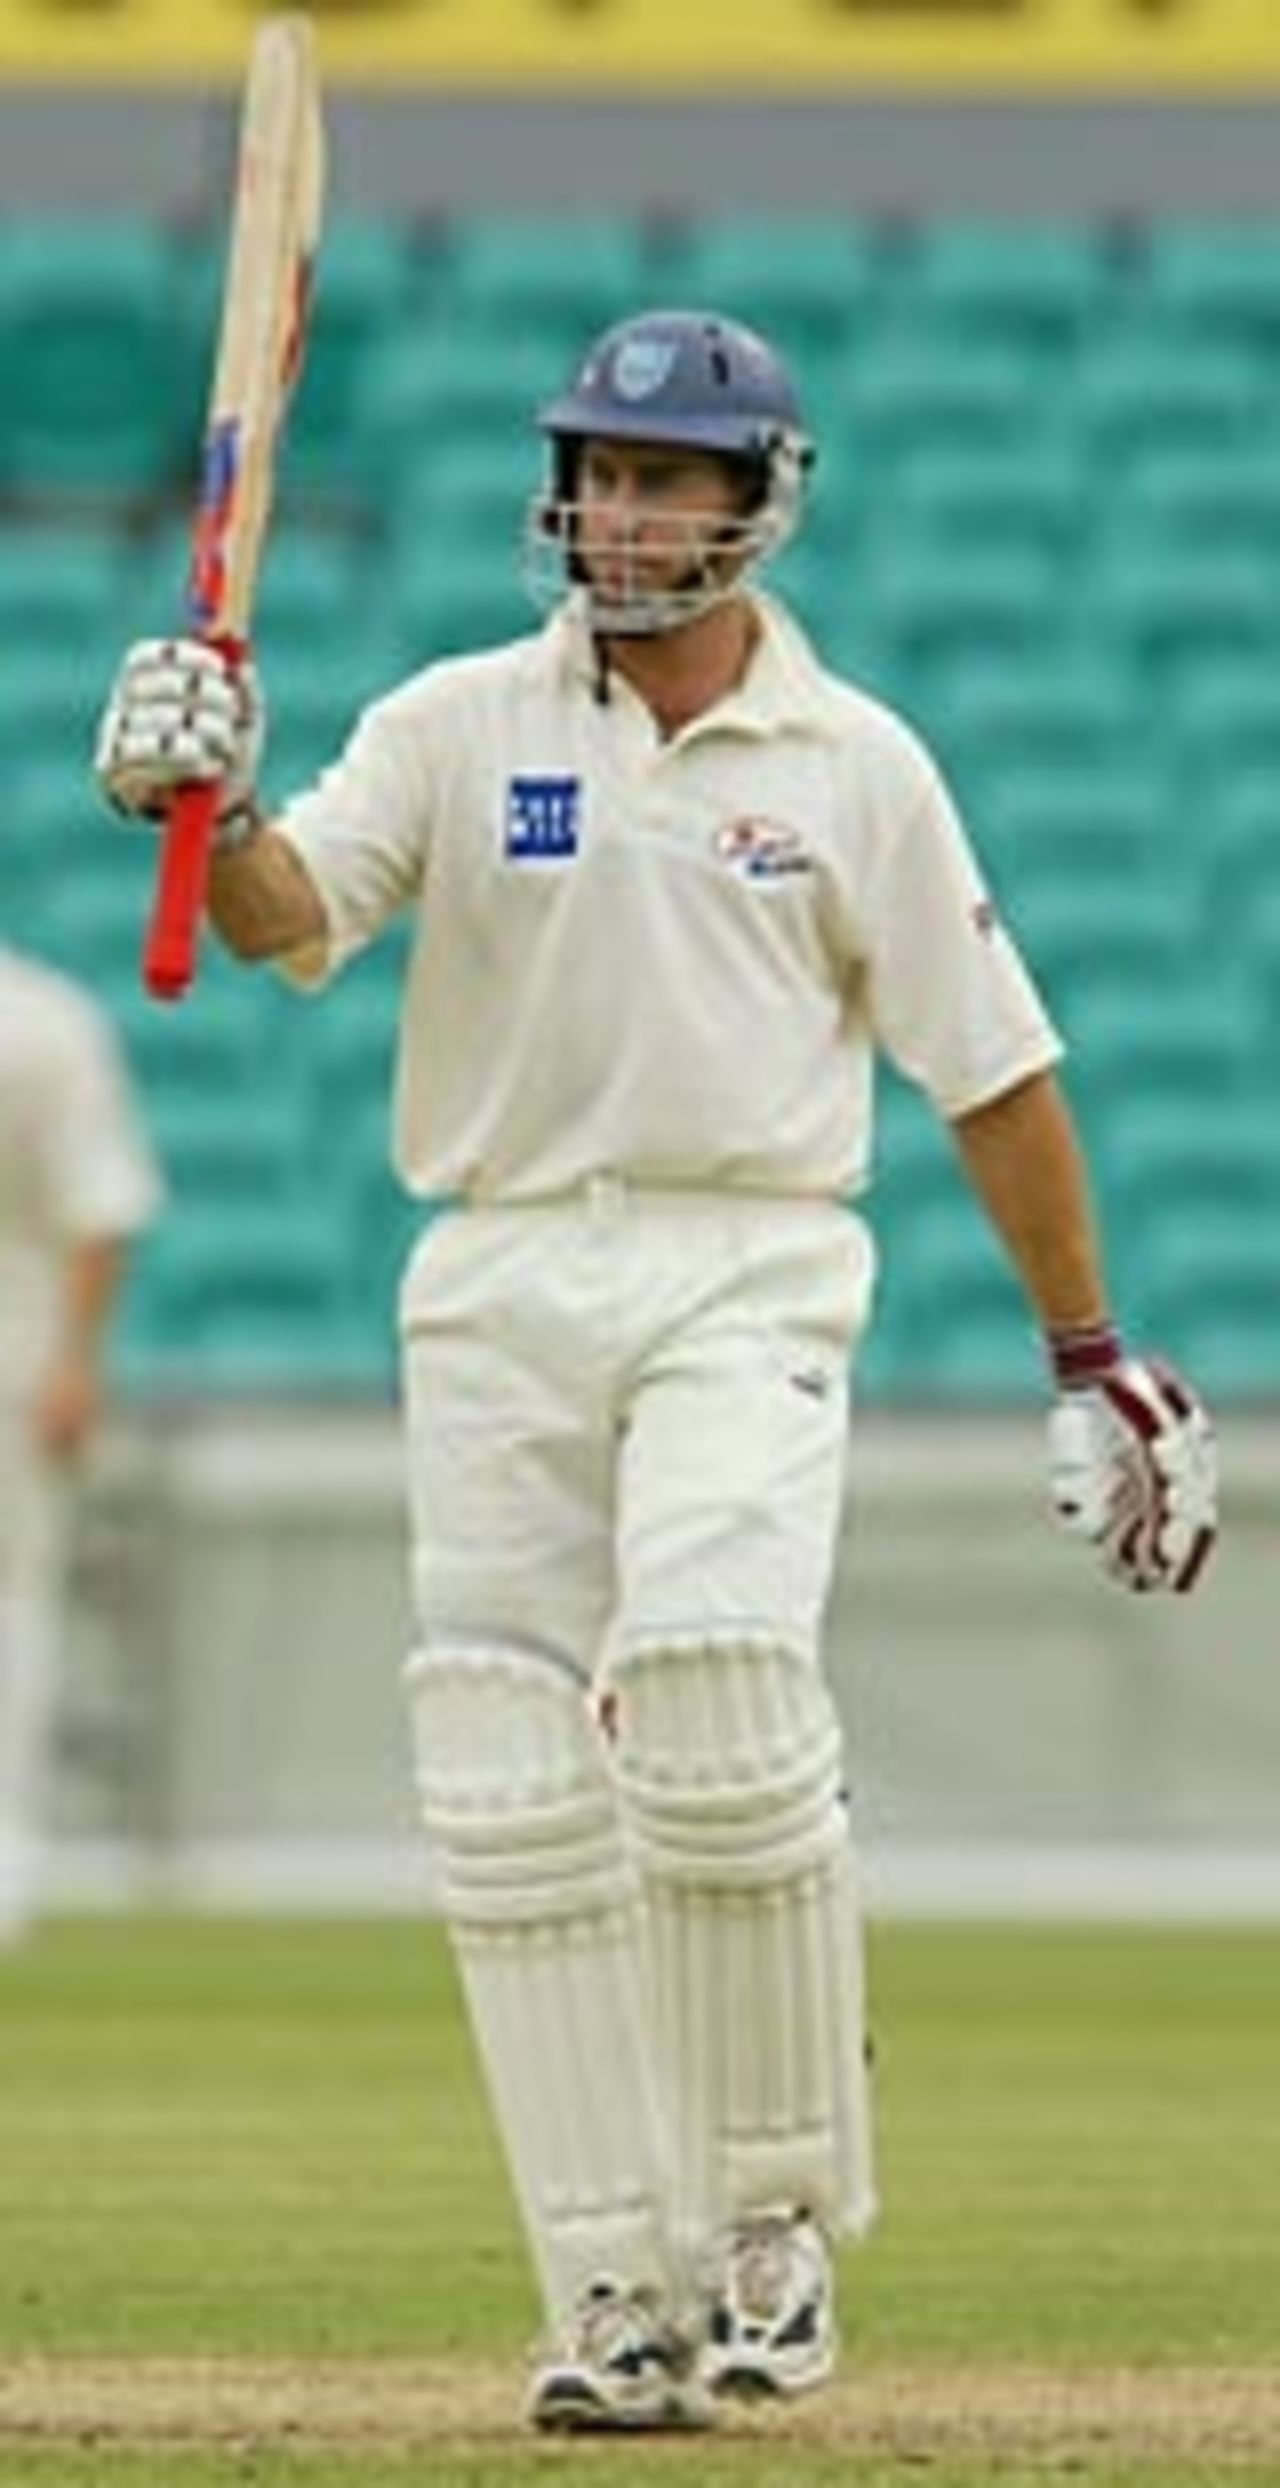 Michael Bevan reaches his second-day hundred, New South Wales v Tasmania, Sydney, December 20, 2003